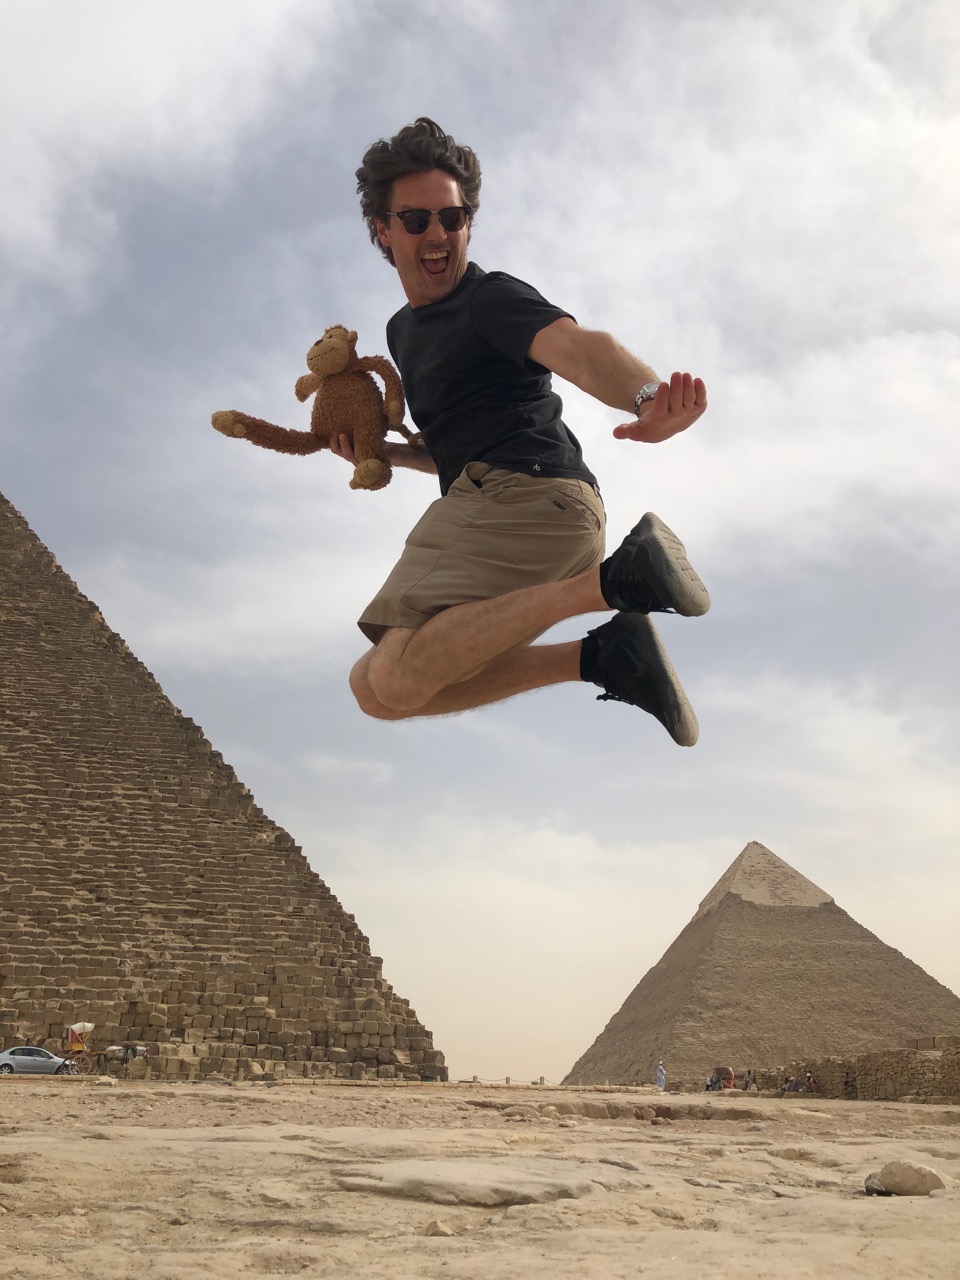 a man jumping in the air with a stuffed animal and a pyramid